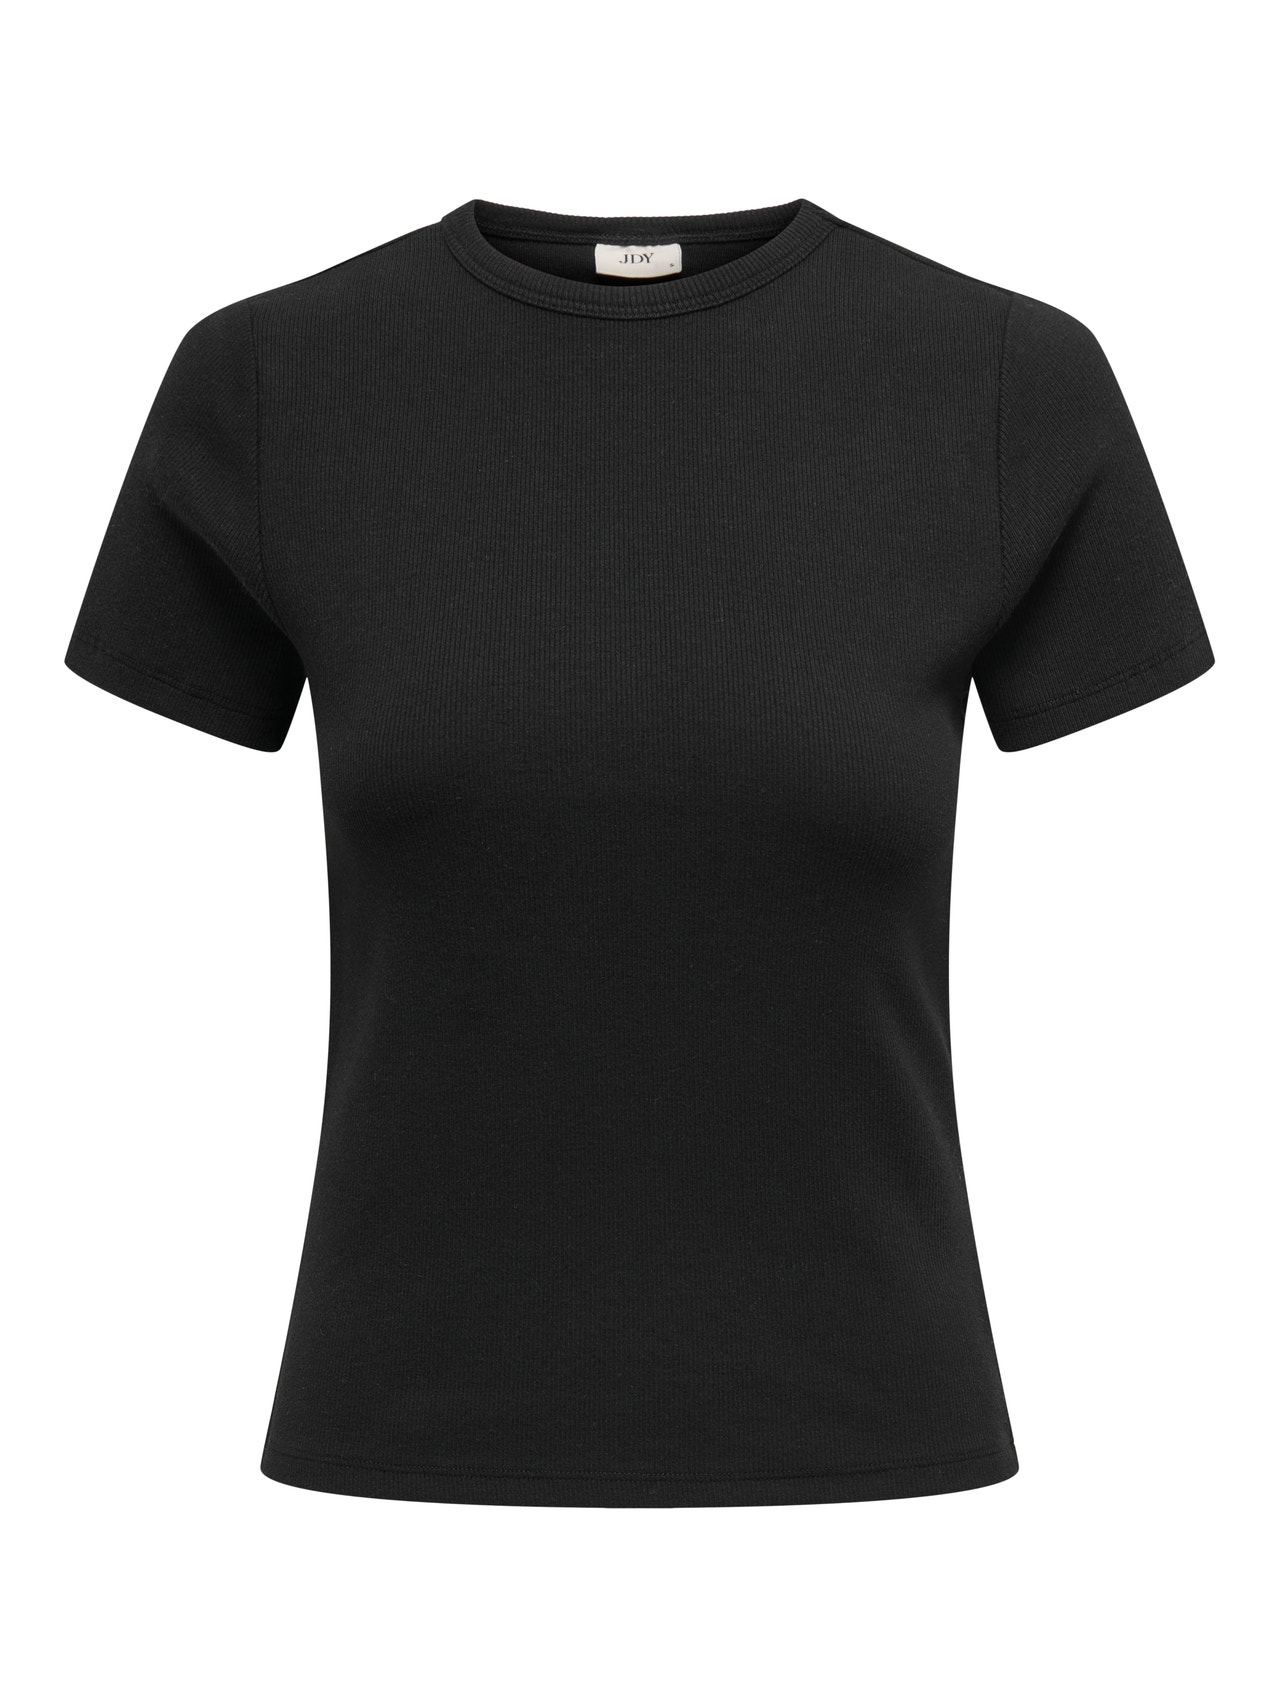 ONLY O-neck top -Black - 15314449